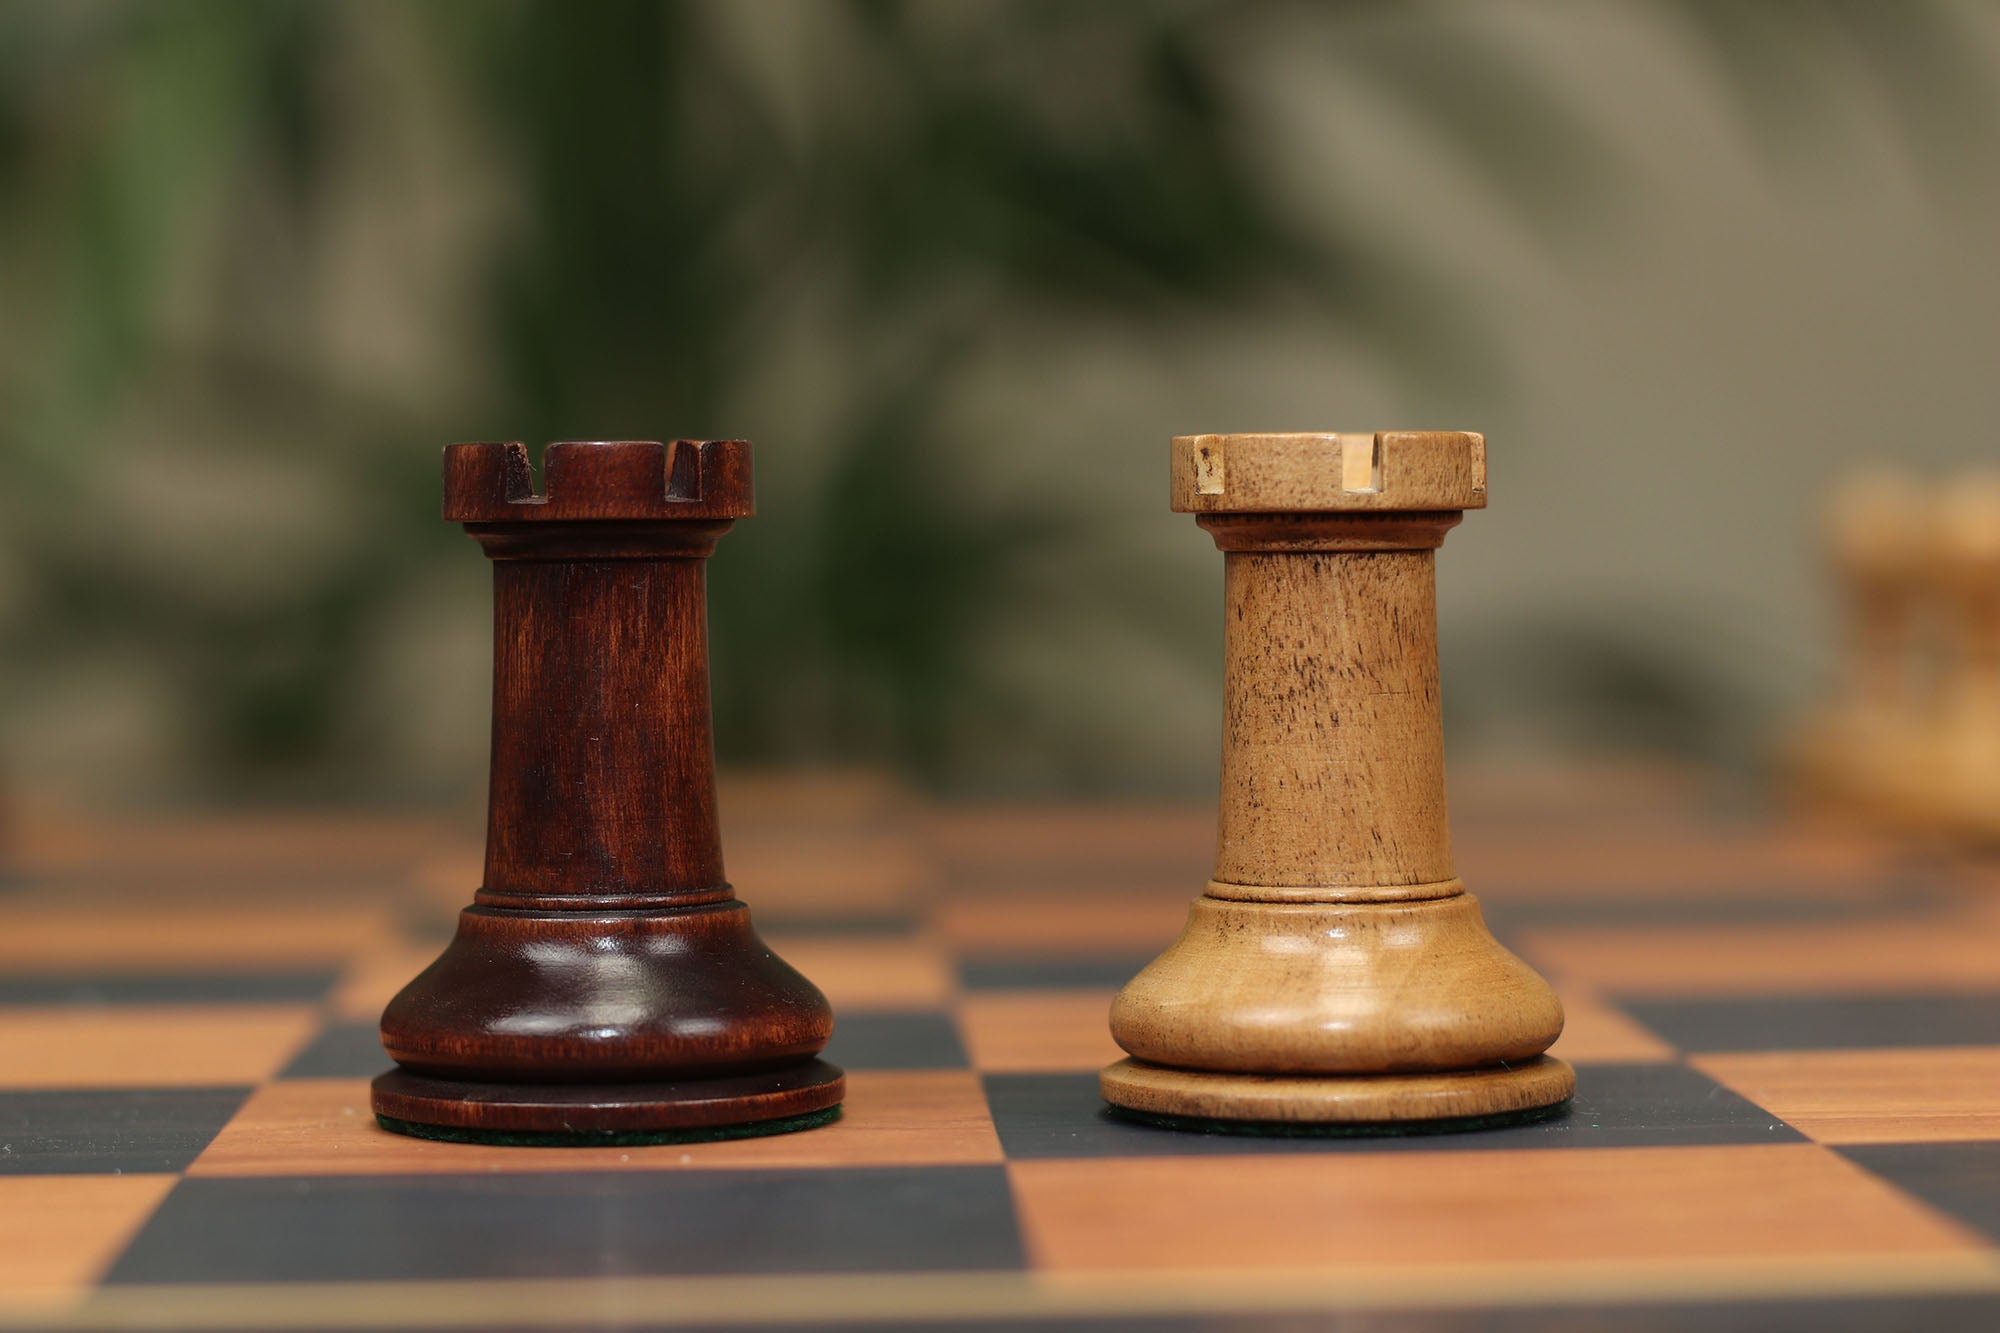 Walter Grimshaw 1854 Reproduced Staunton 3.5"  Distressed/Mahogany Stained Boxwood Chessmen